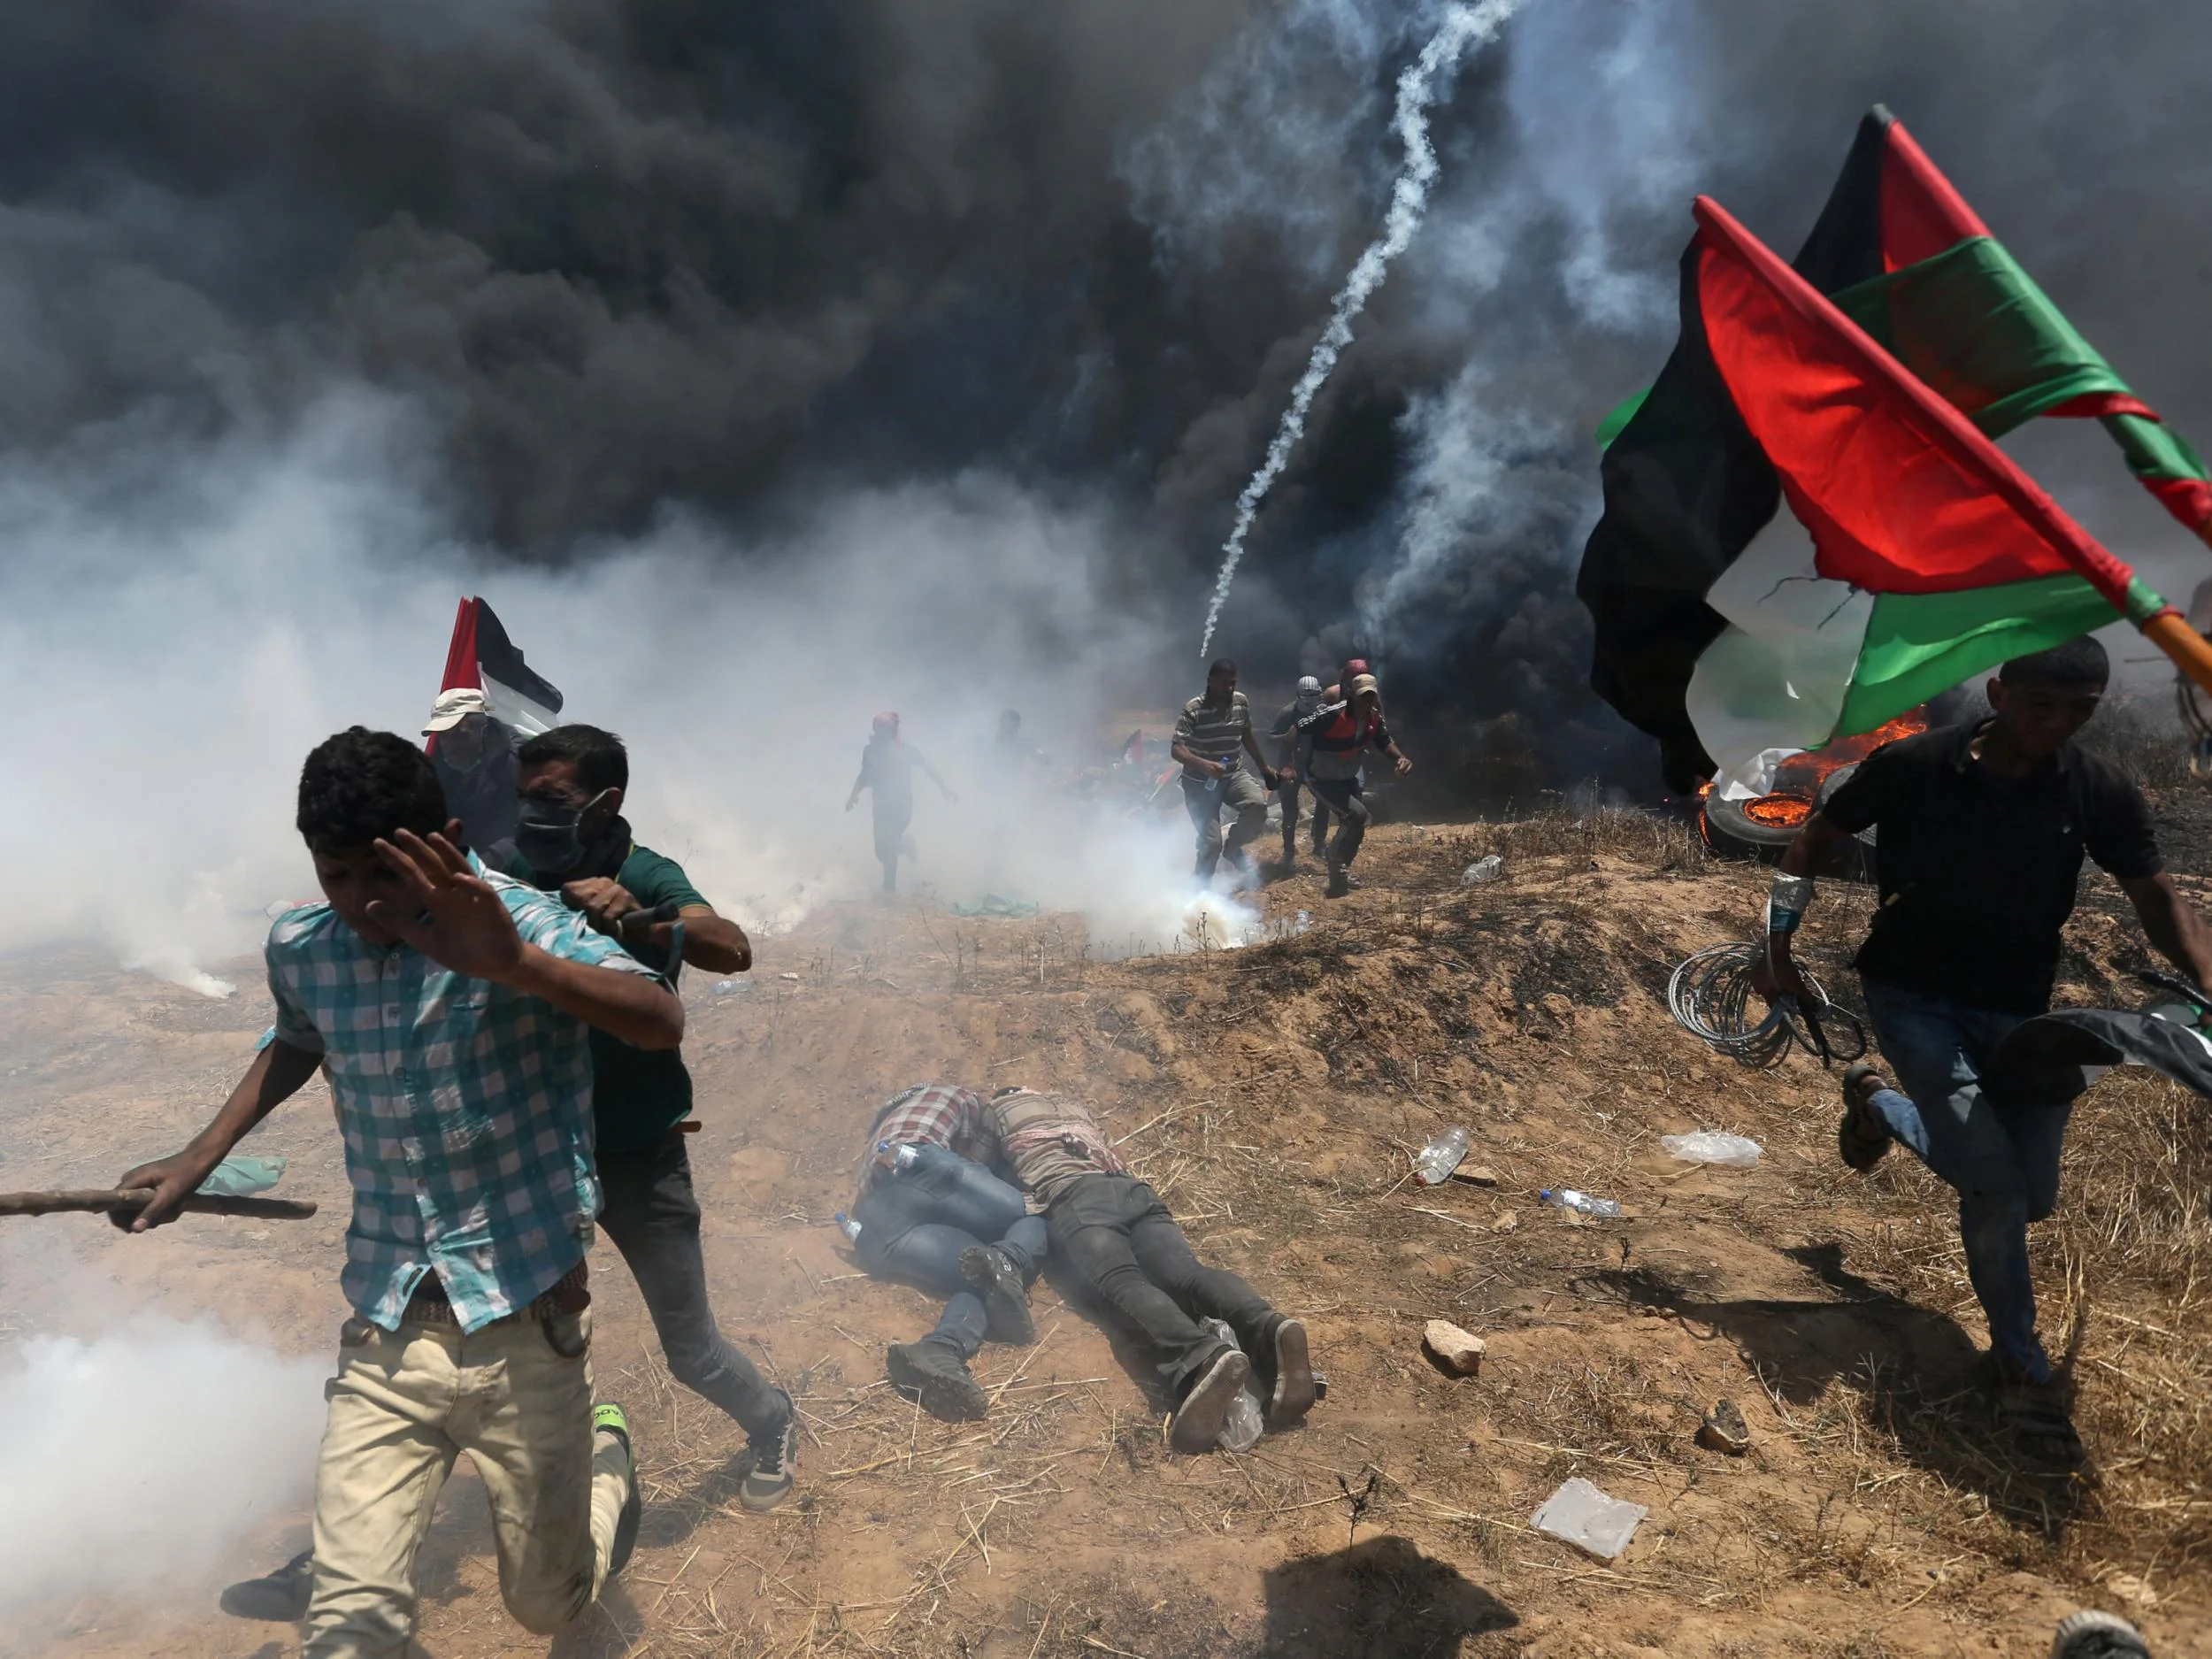 Palestine protesters flee from Israeli tear gas at a demonstration in May 2018. PHOTO/Reuters.